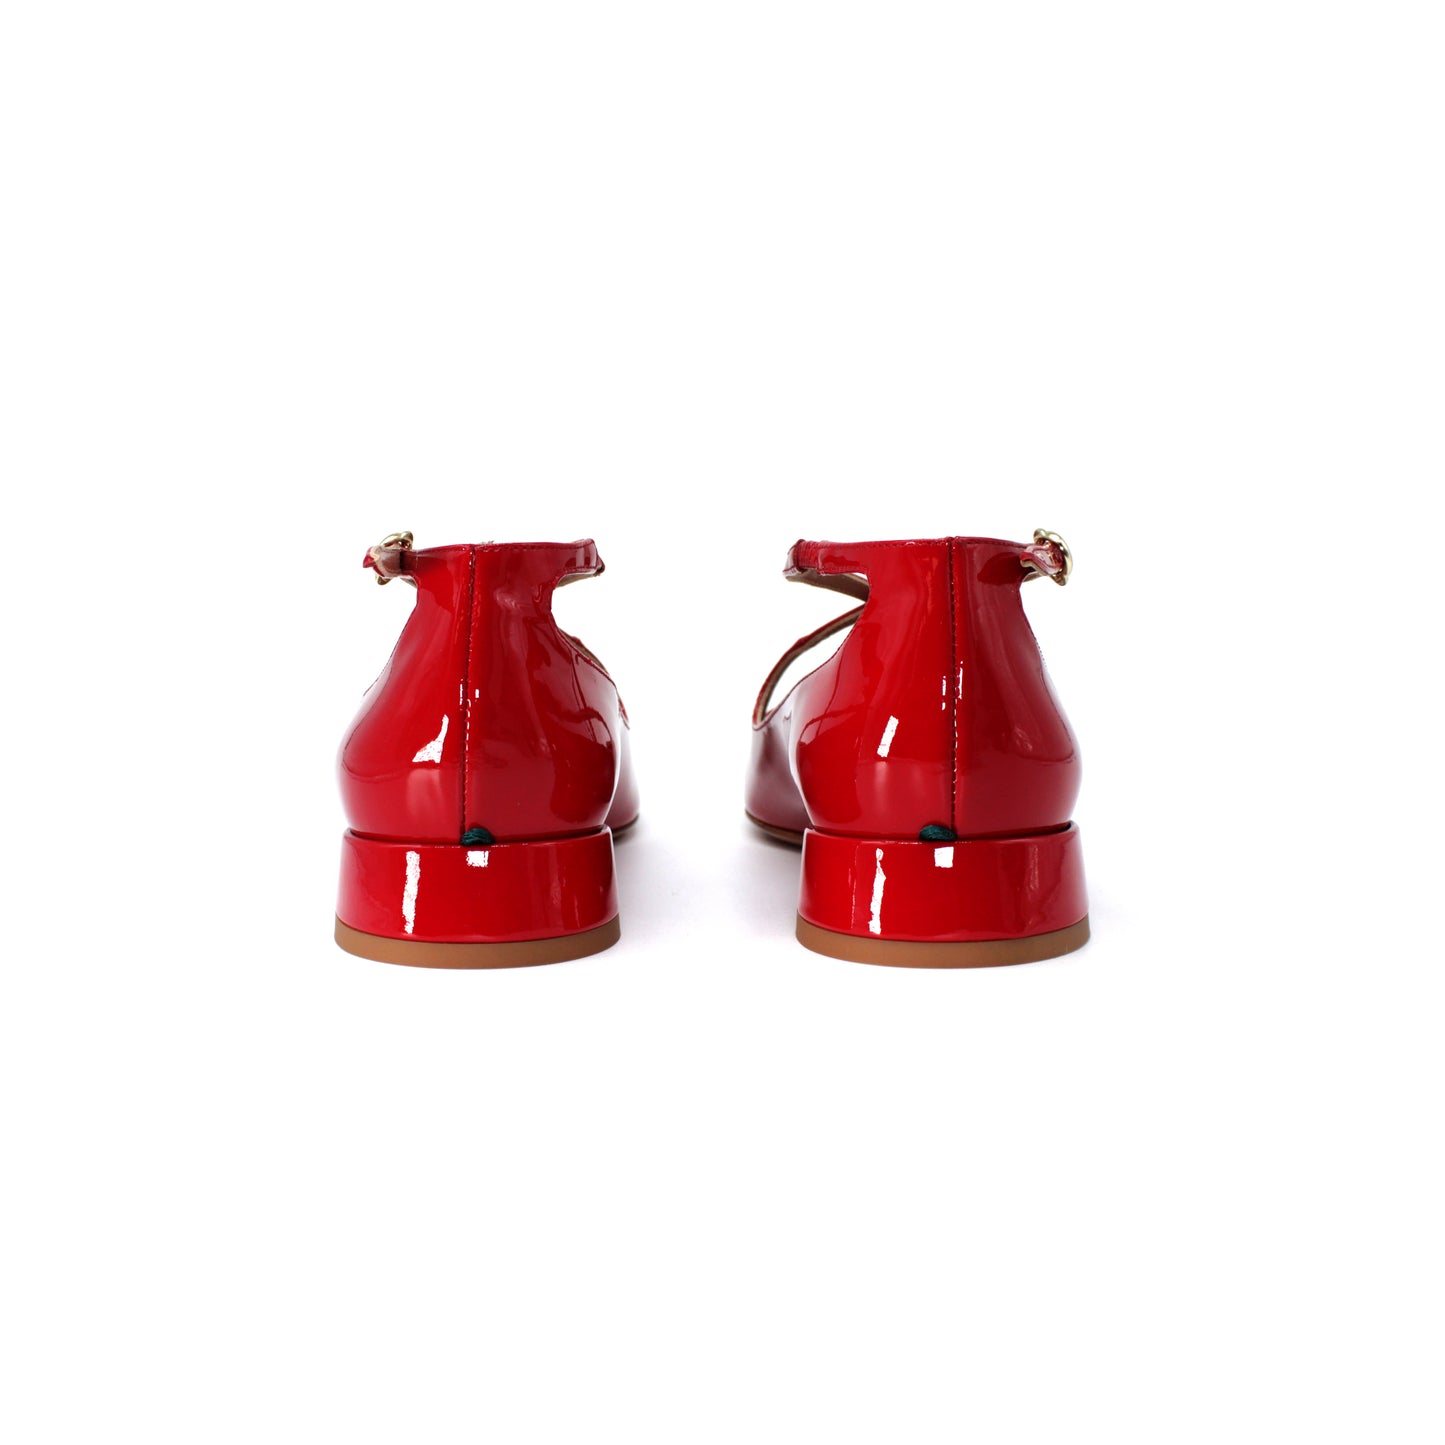 Pump Two for Love in red patent leather - Carry over